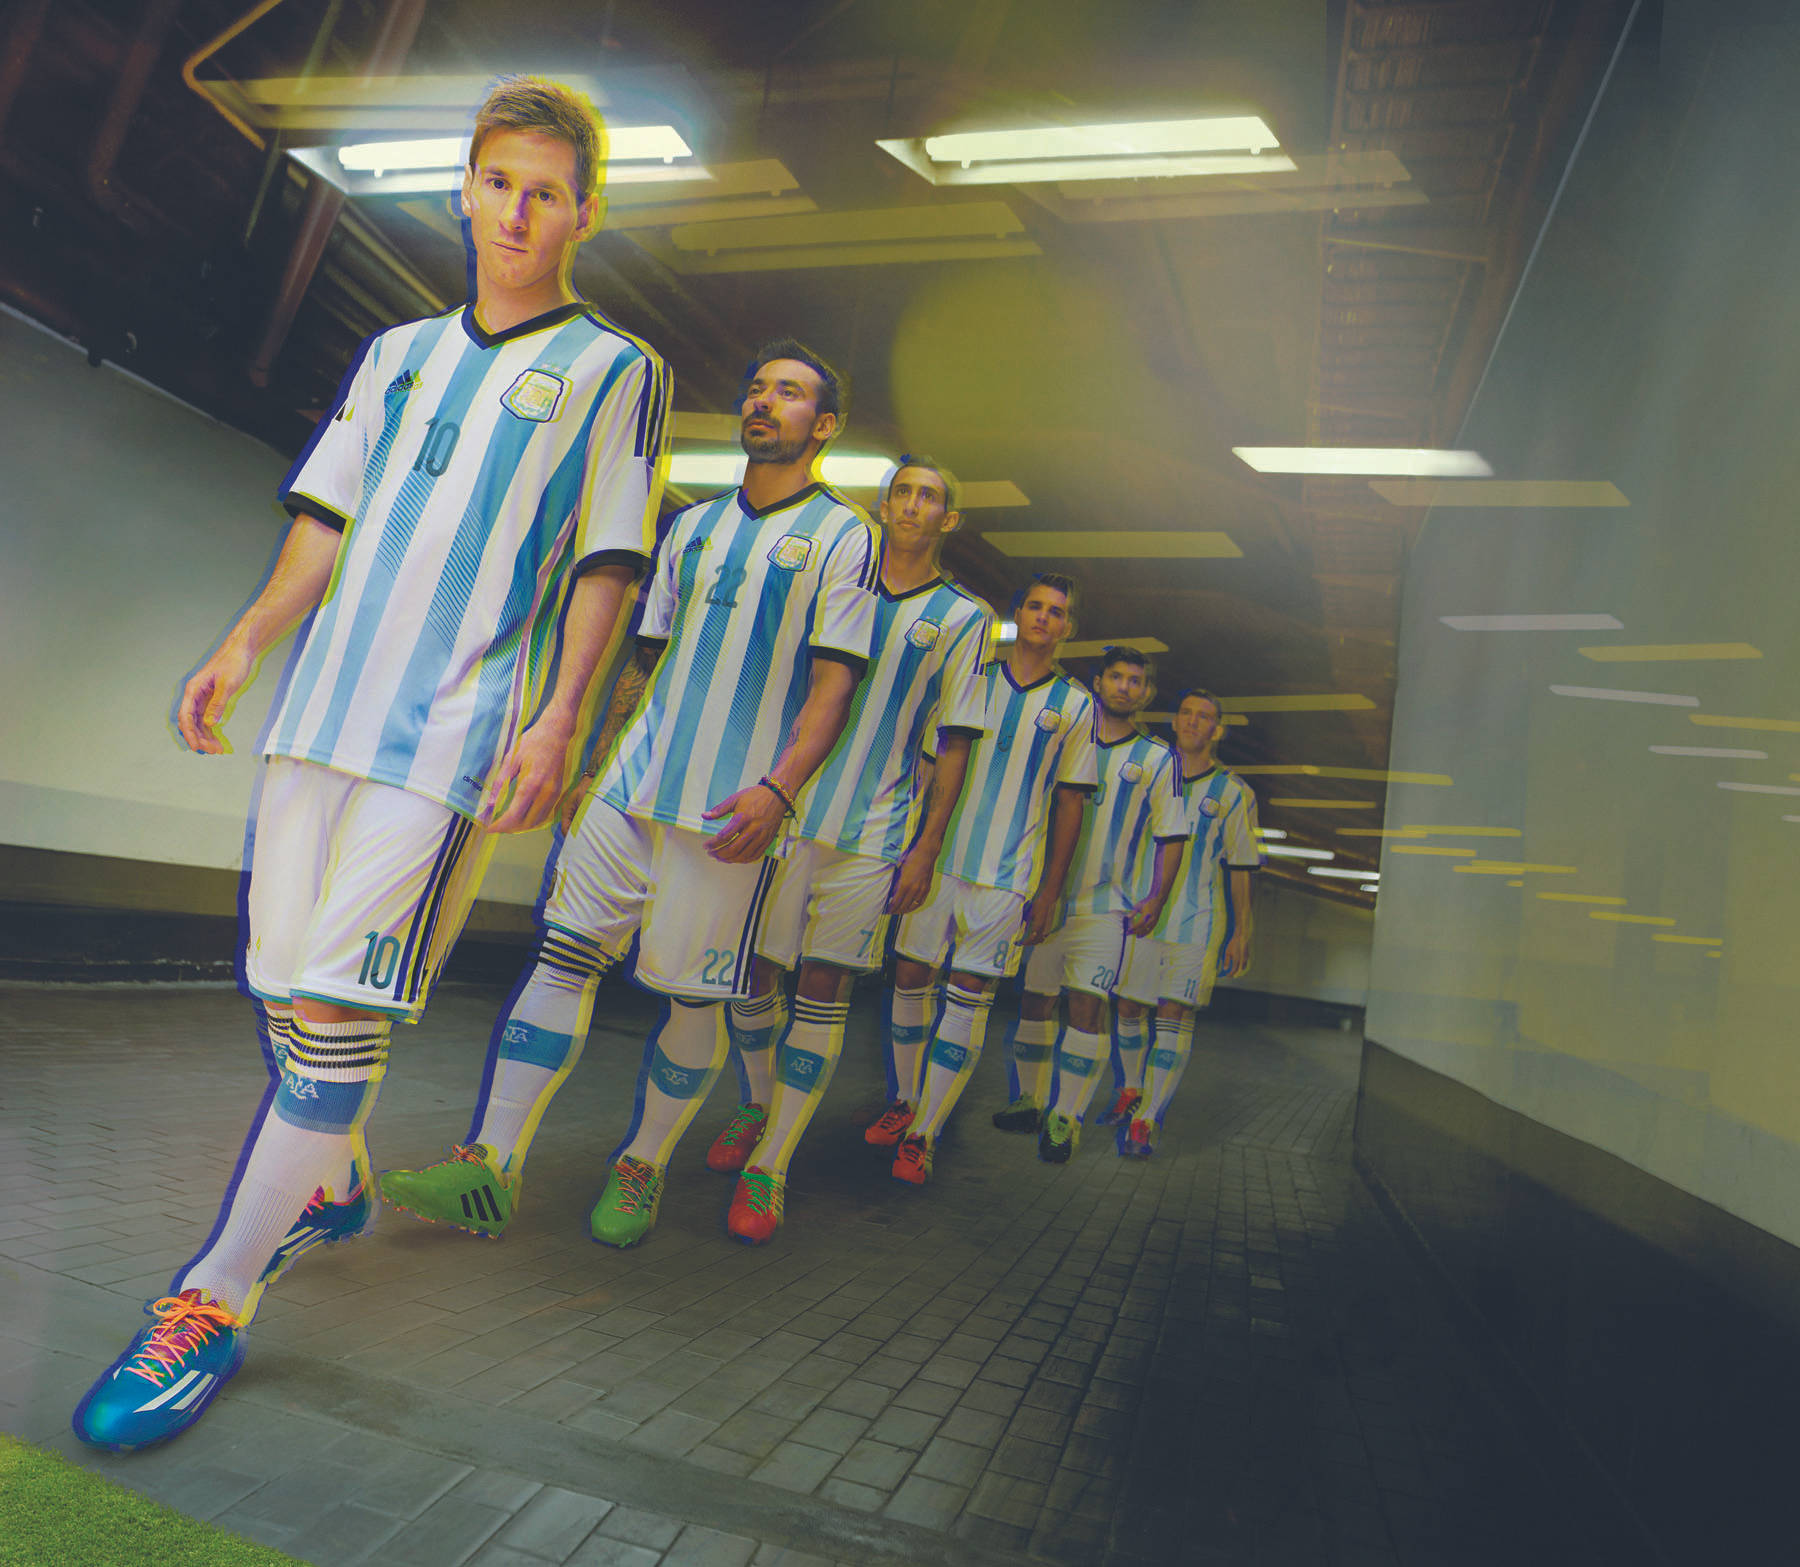 Argentina National Football Team Players In Hallway Wallpaper